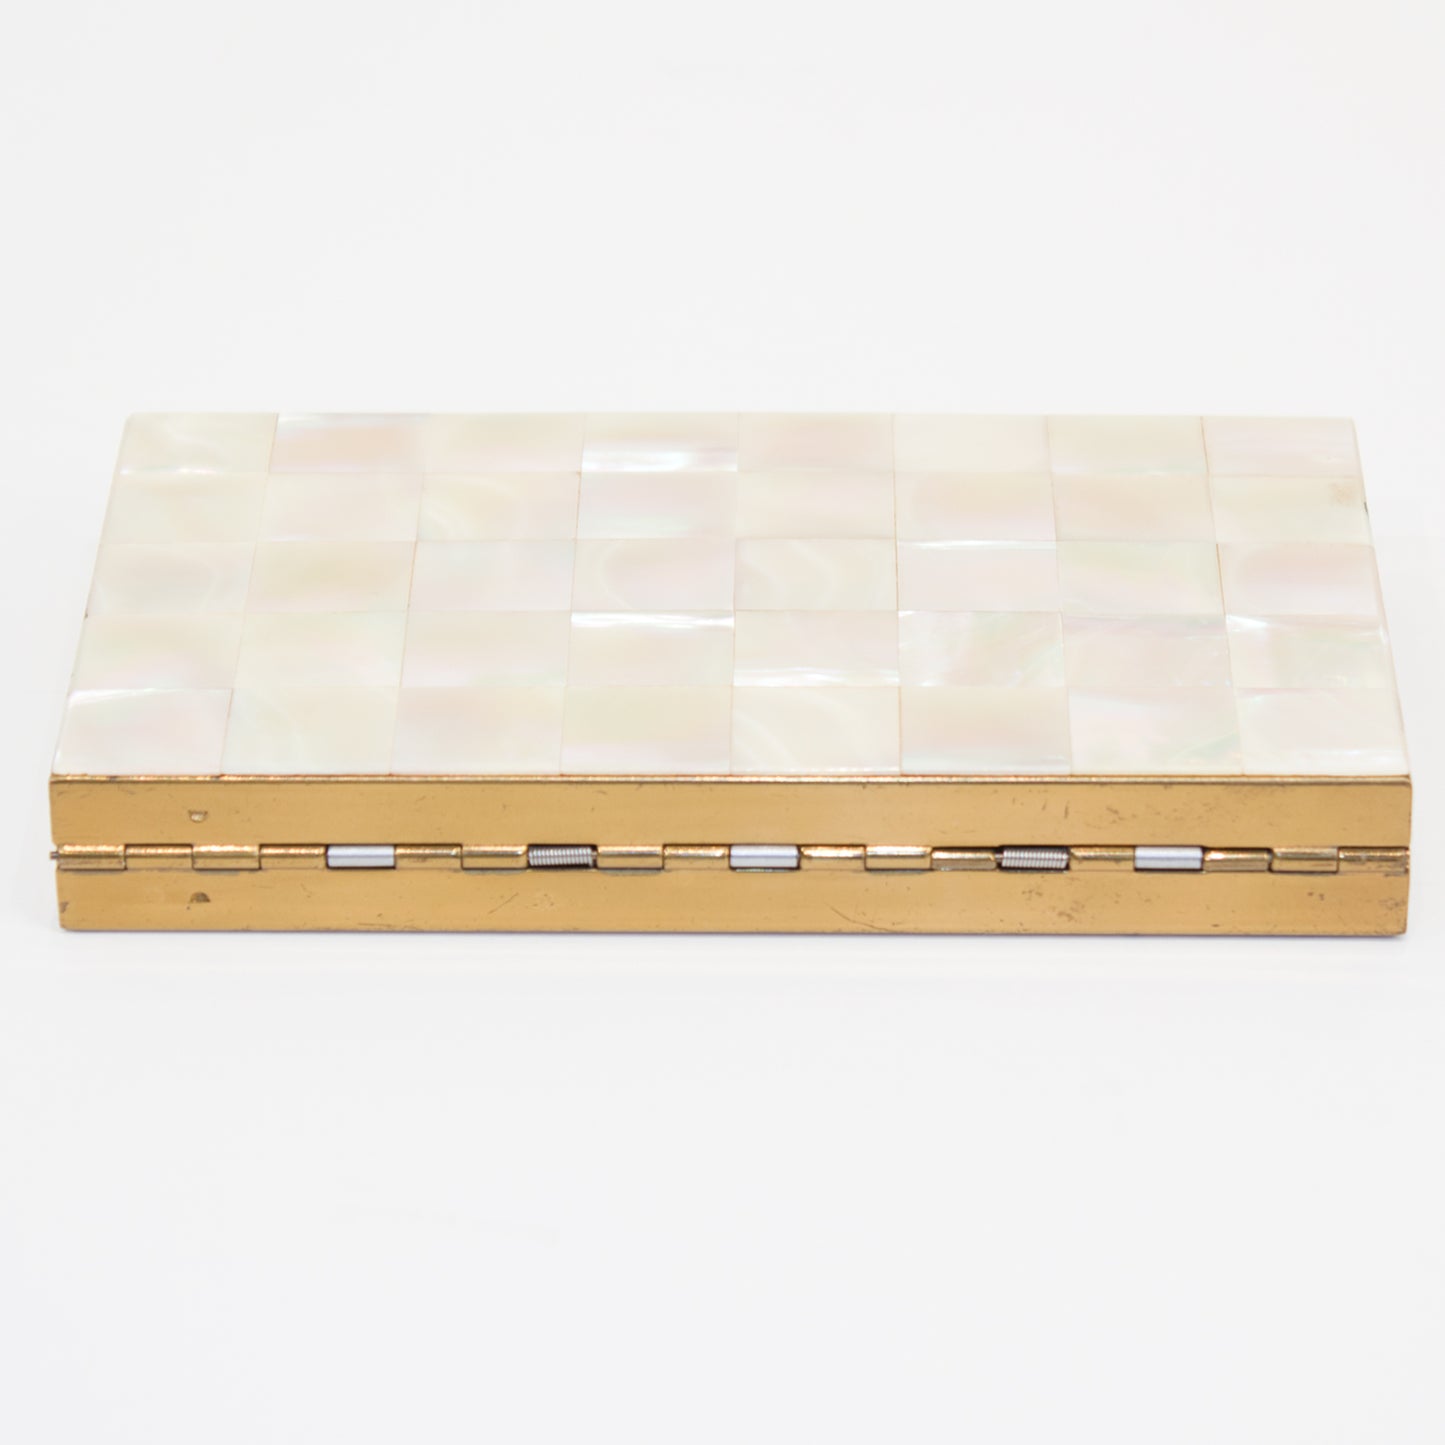 Mother of Pearl Compact and All-in-One Case